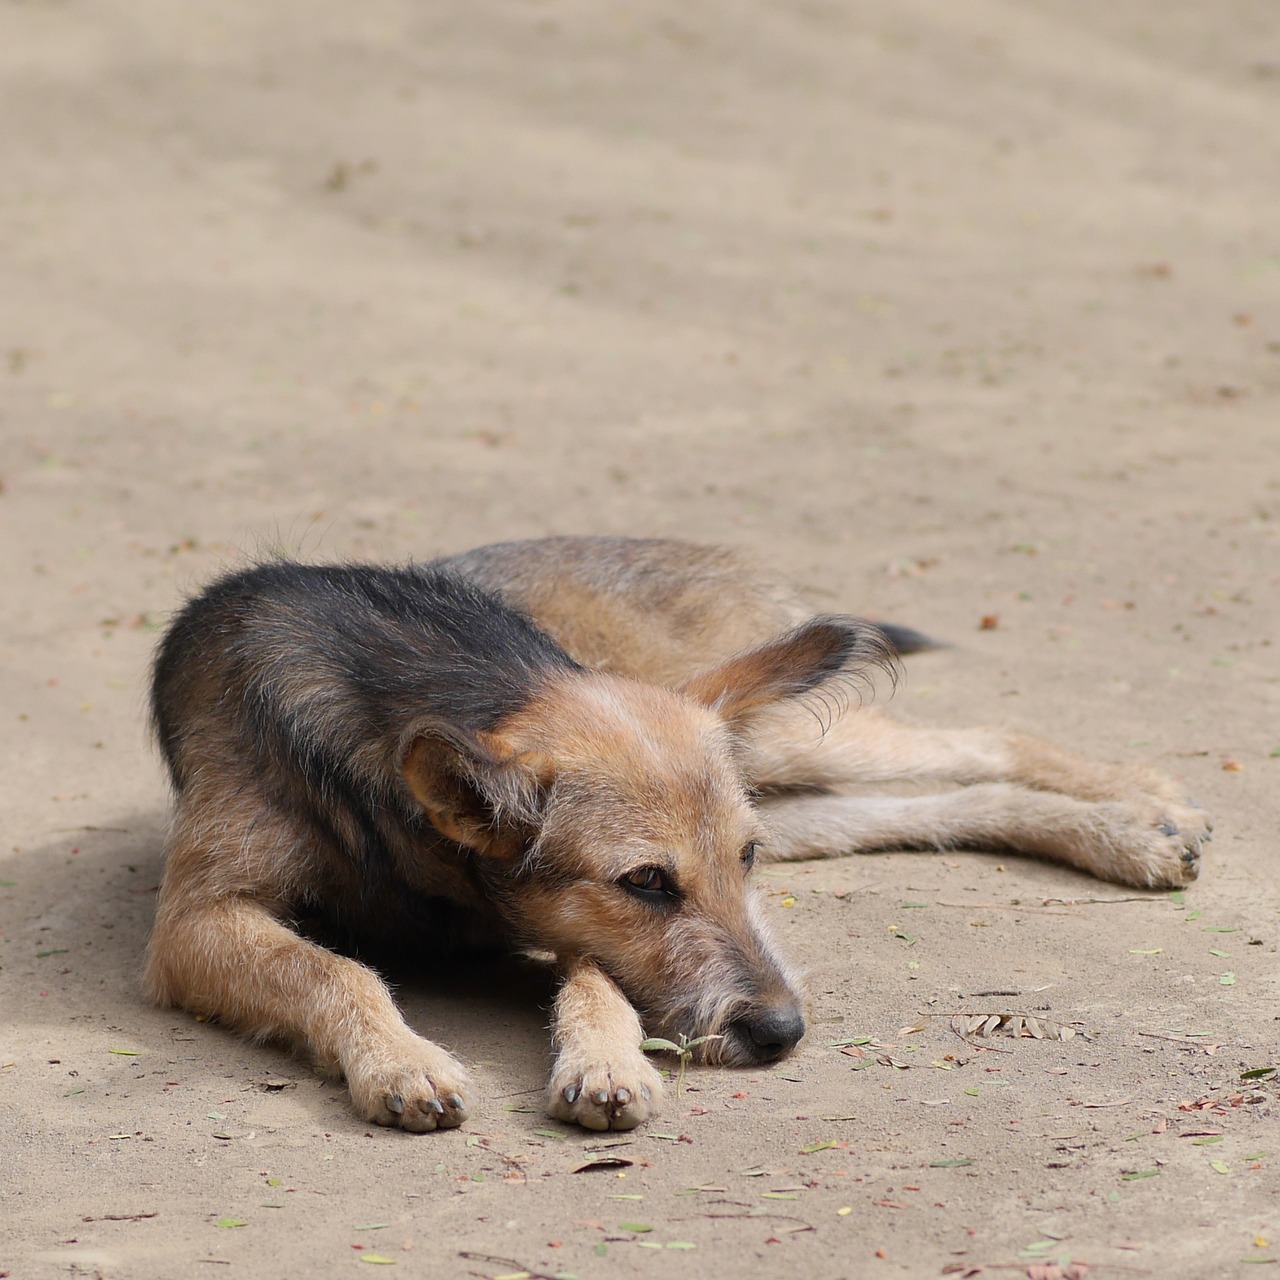 a brown and black dog laying on top of a sandy ground, sumatraism, bangalore, hatched pointed ears, taken in zoo, very sharp photo